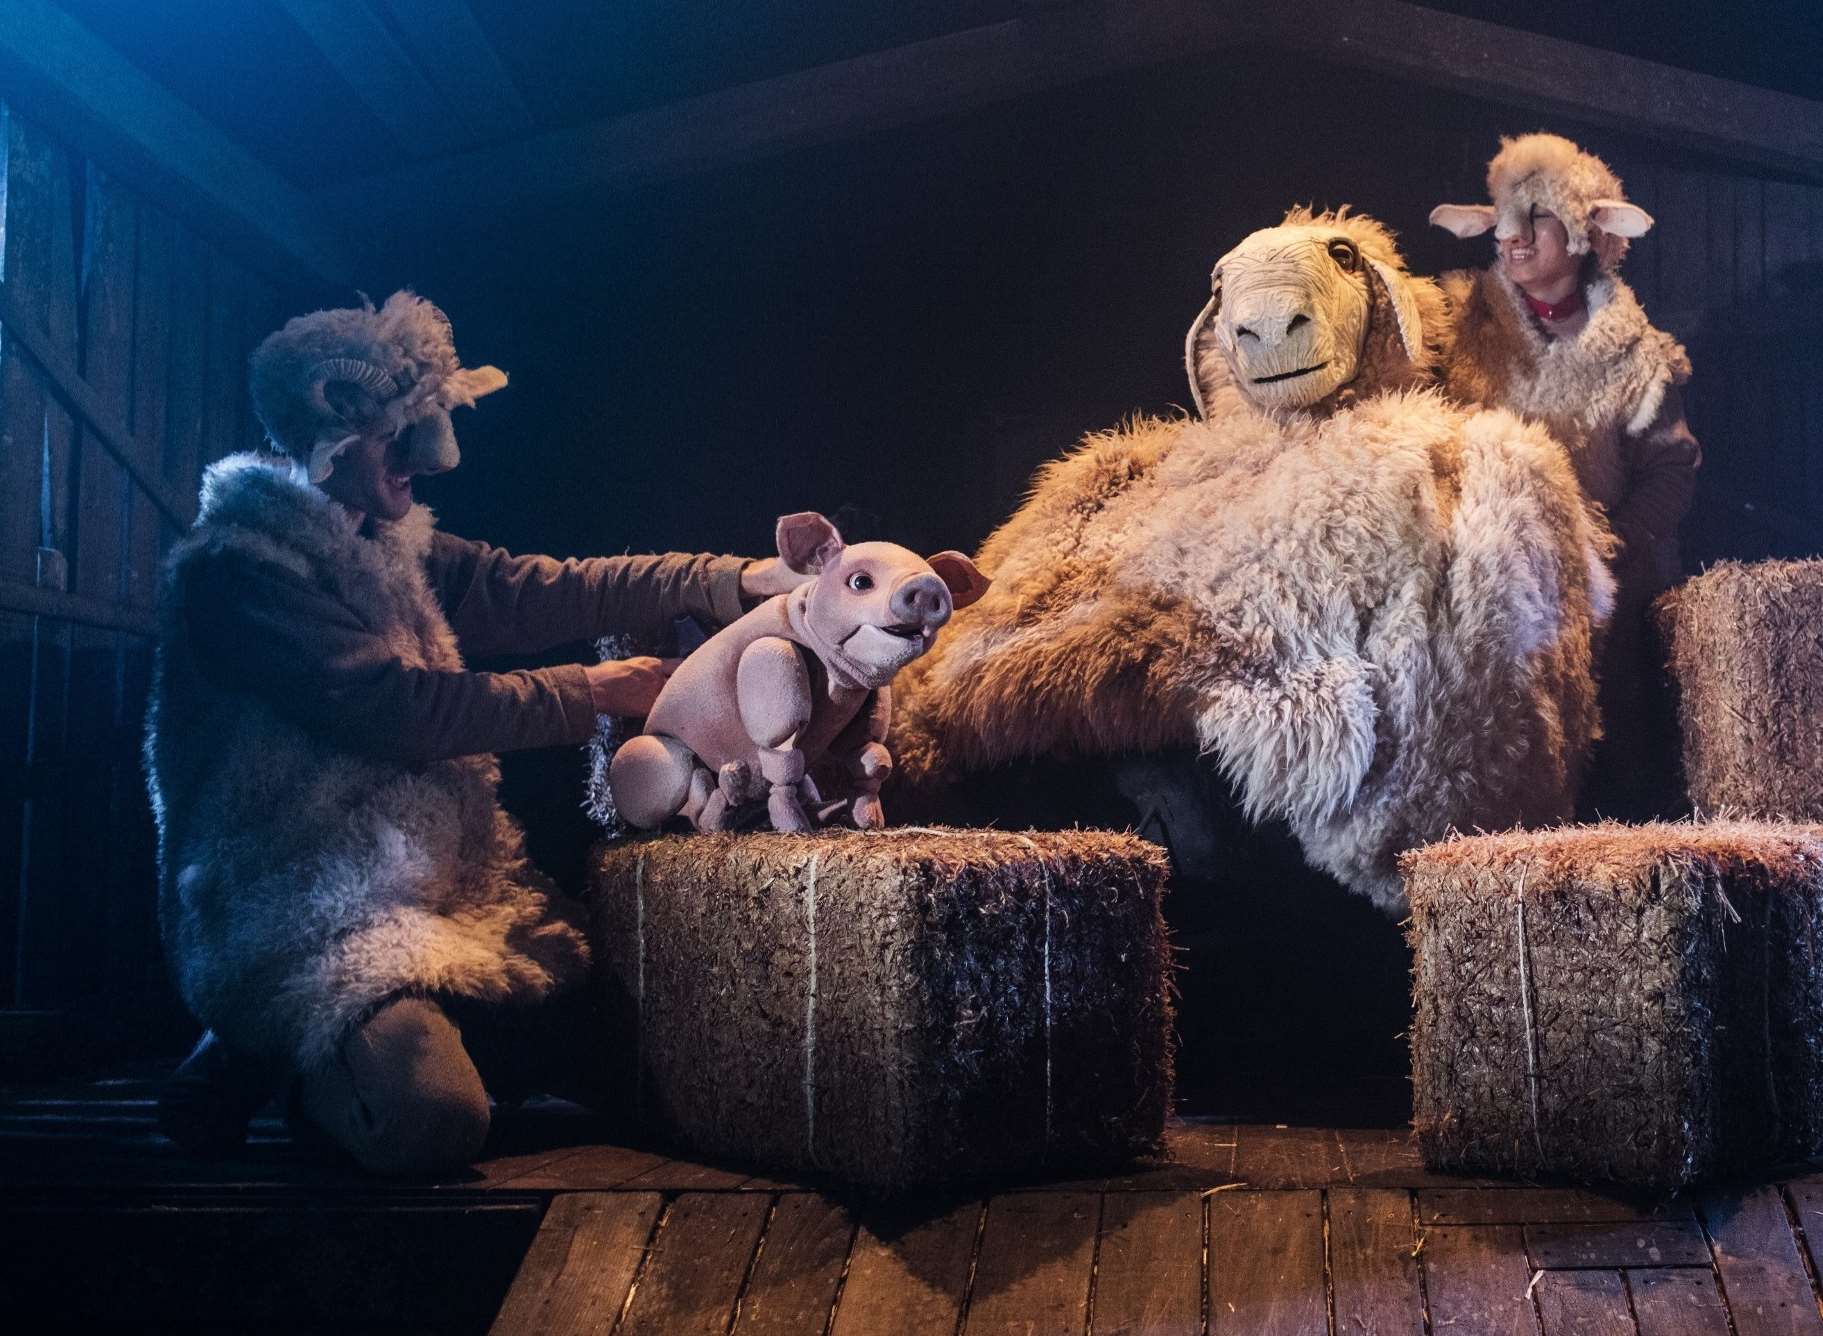 Babe, The Sheep Pig will play at the Orchard Theatre